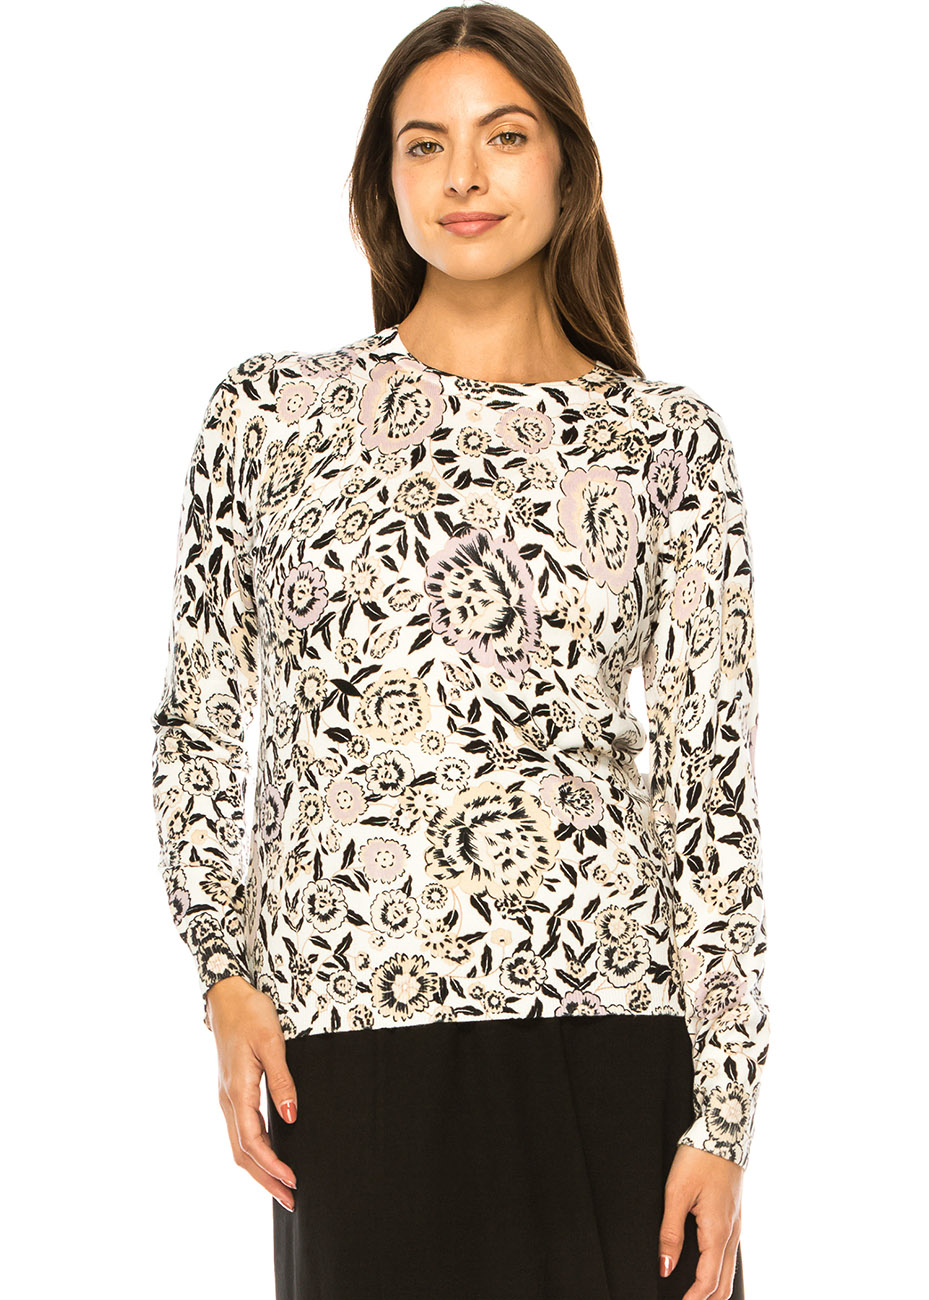 Garden Party Floral Sweater